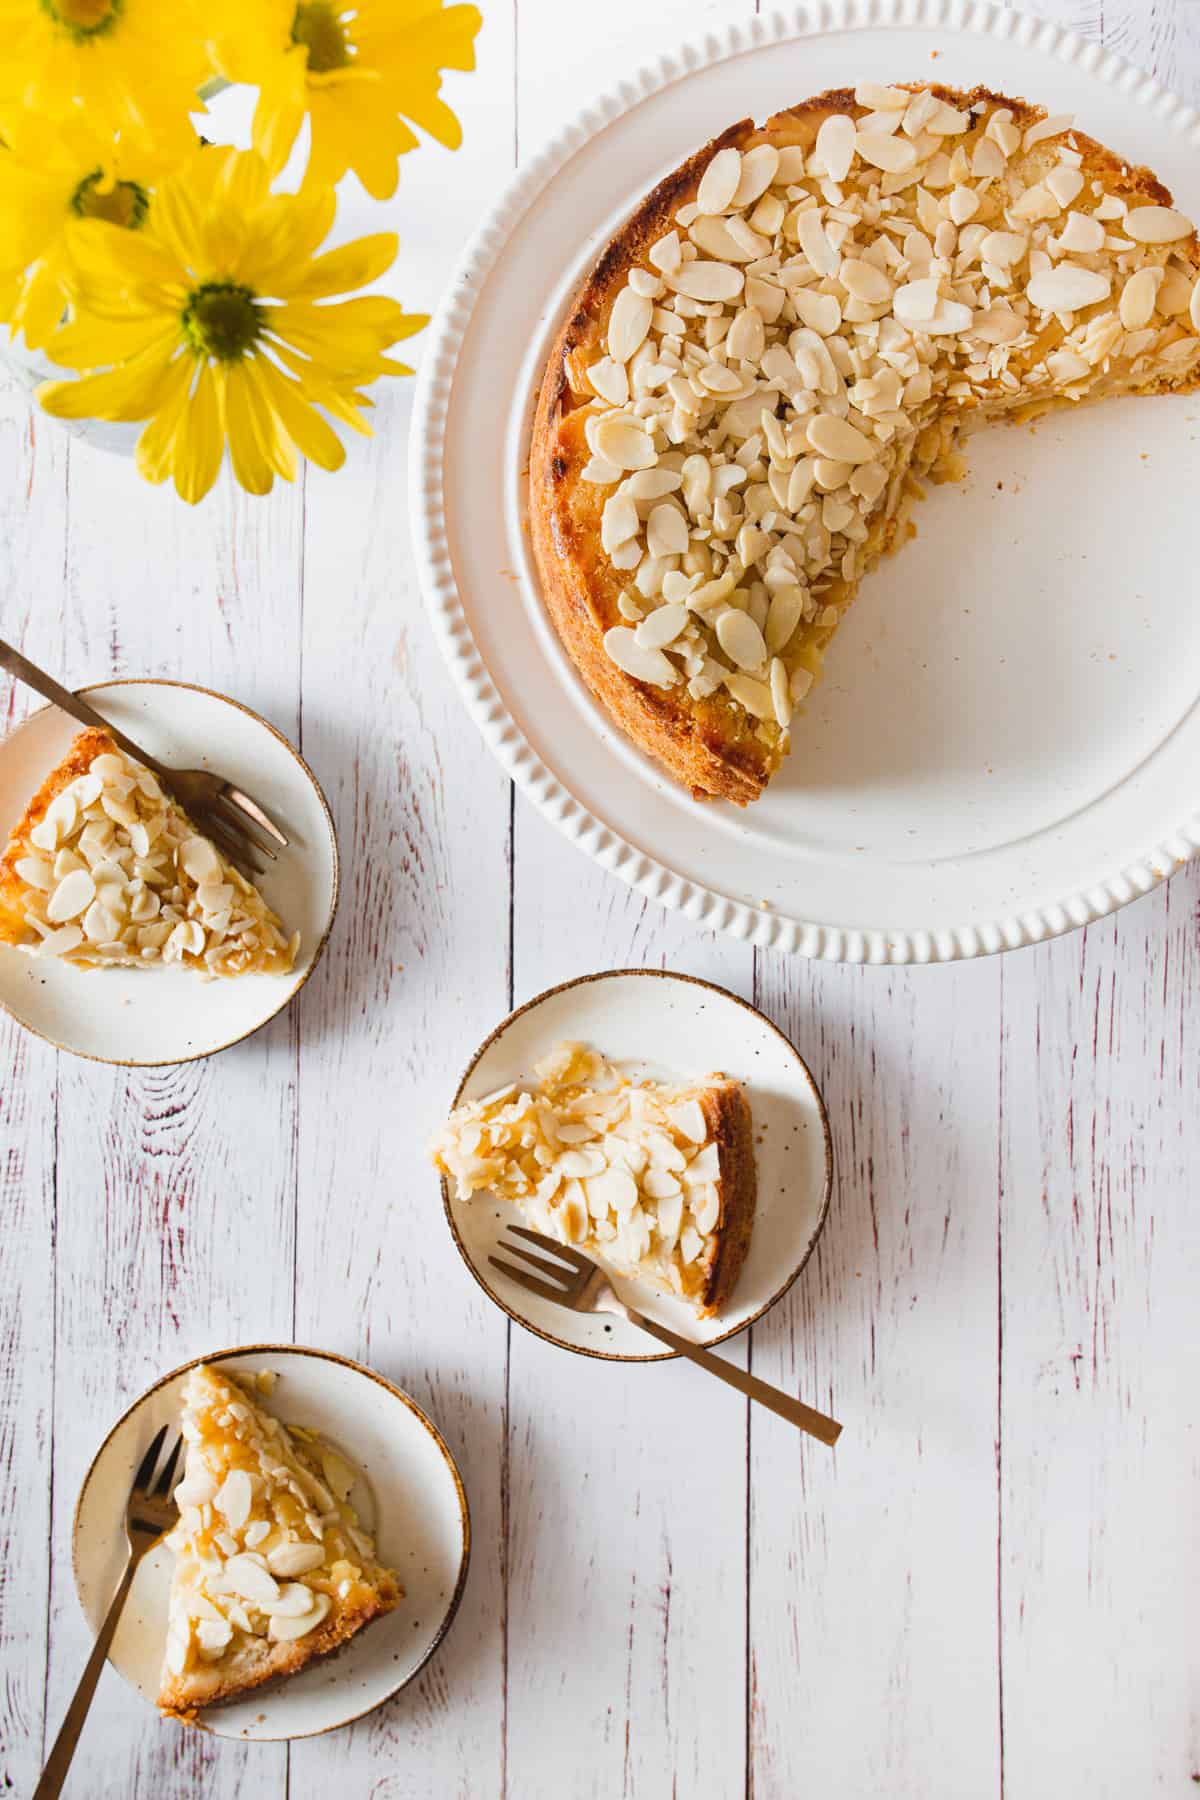 three slices of apple cake with cut cake